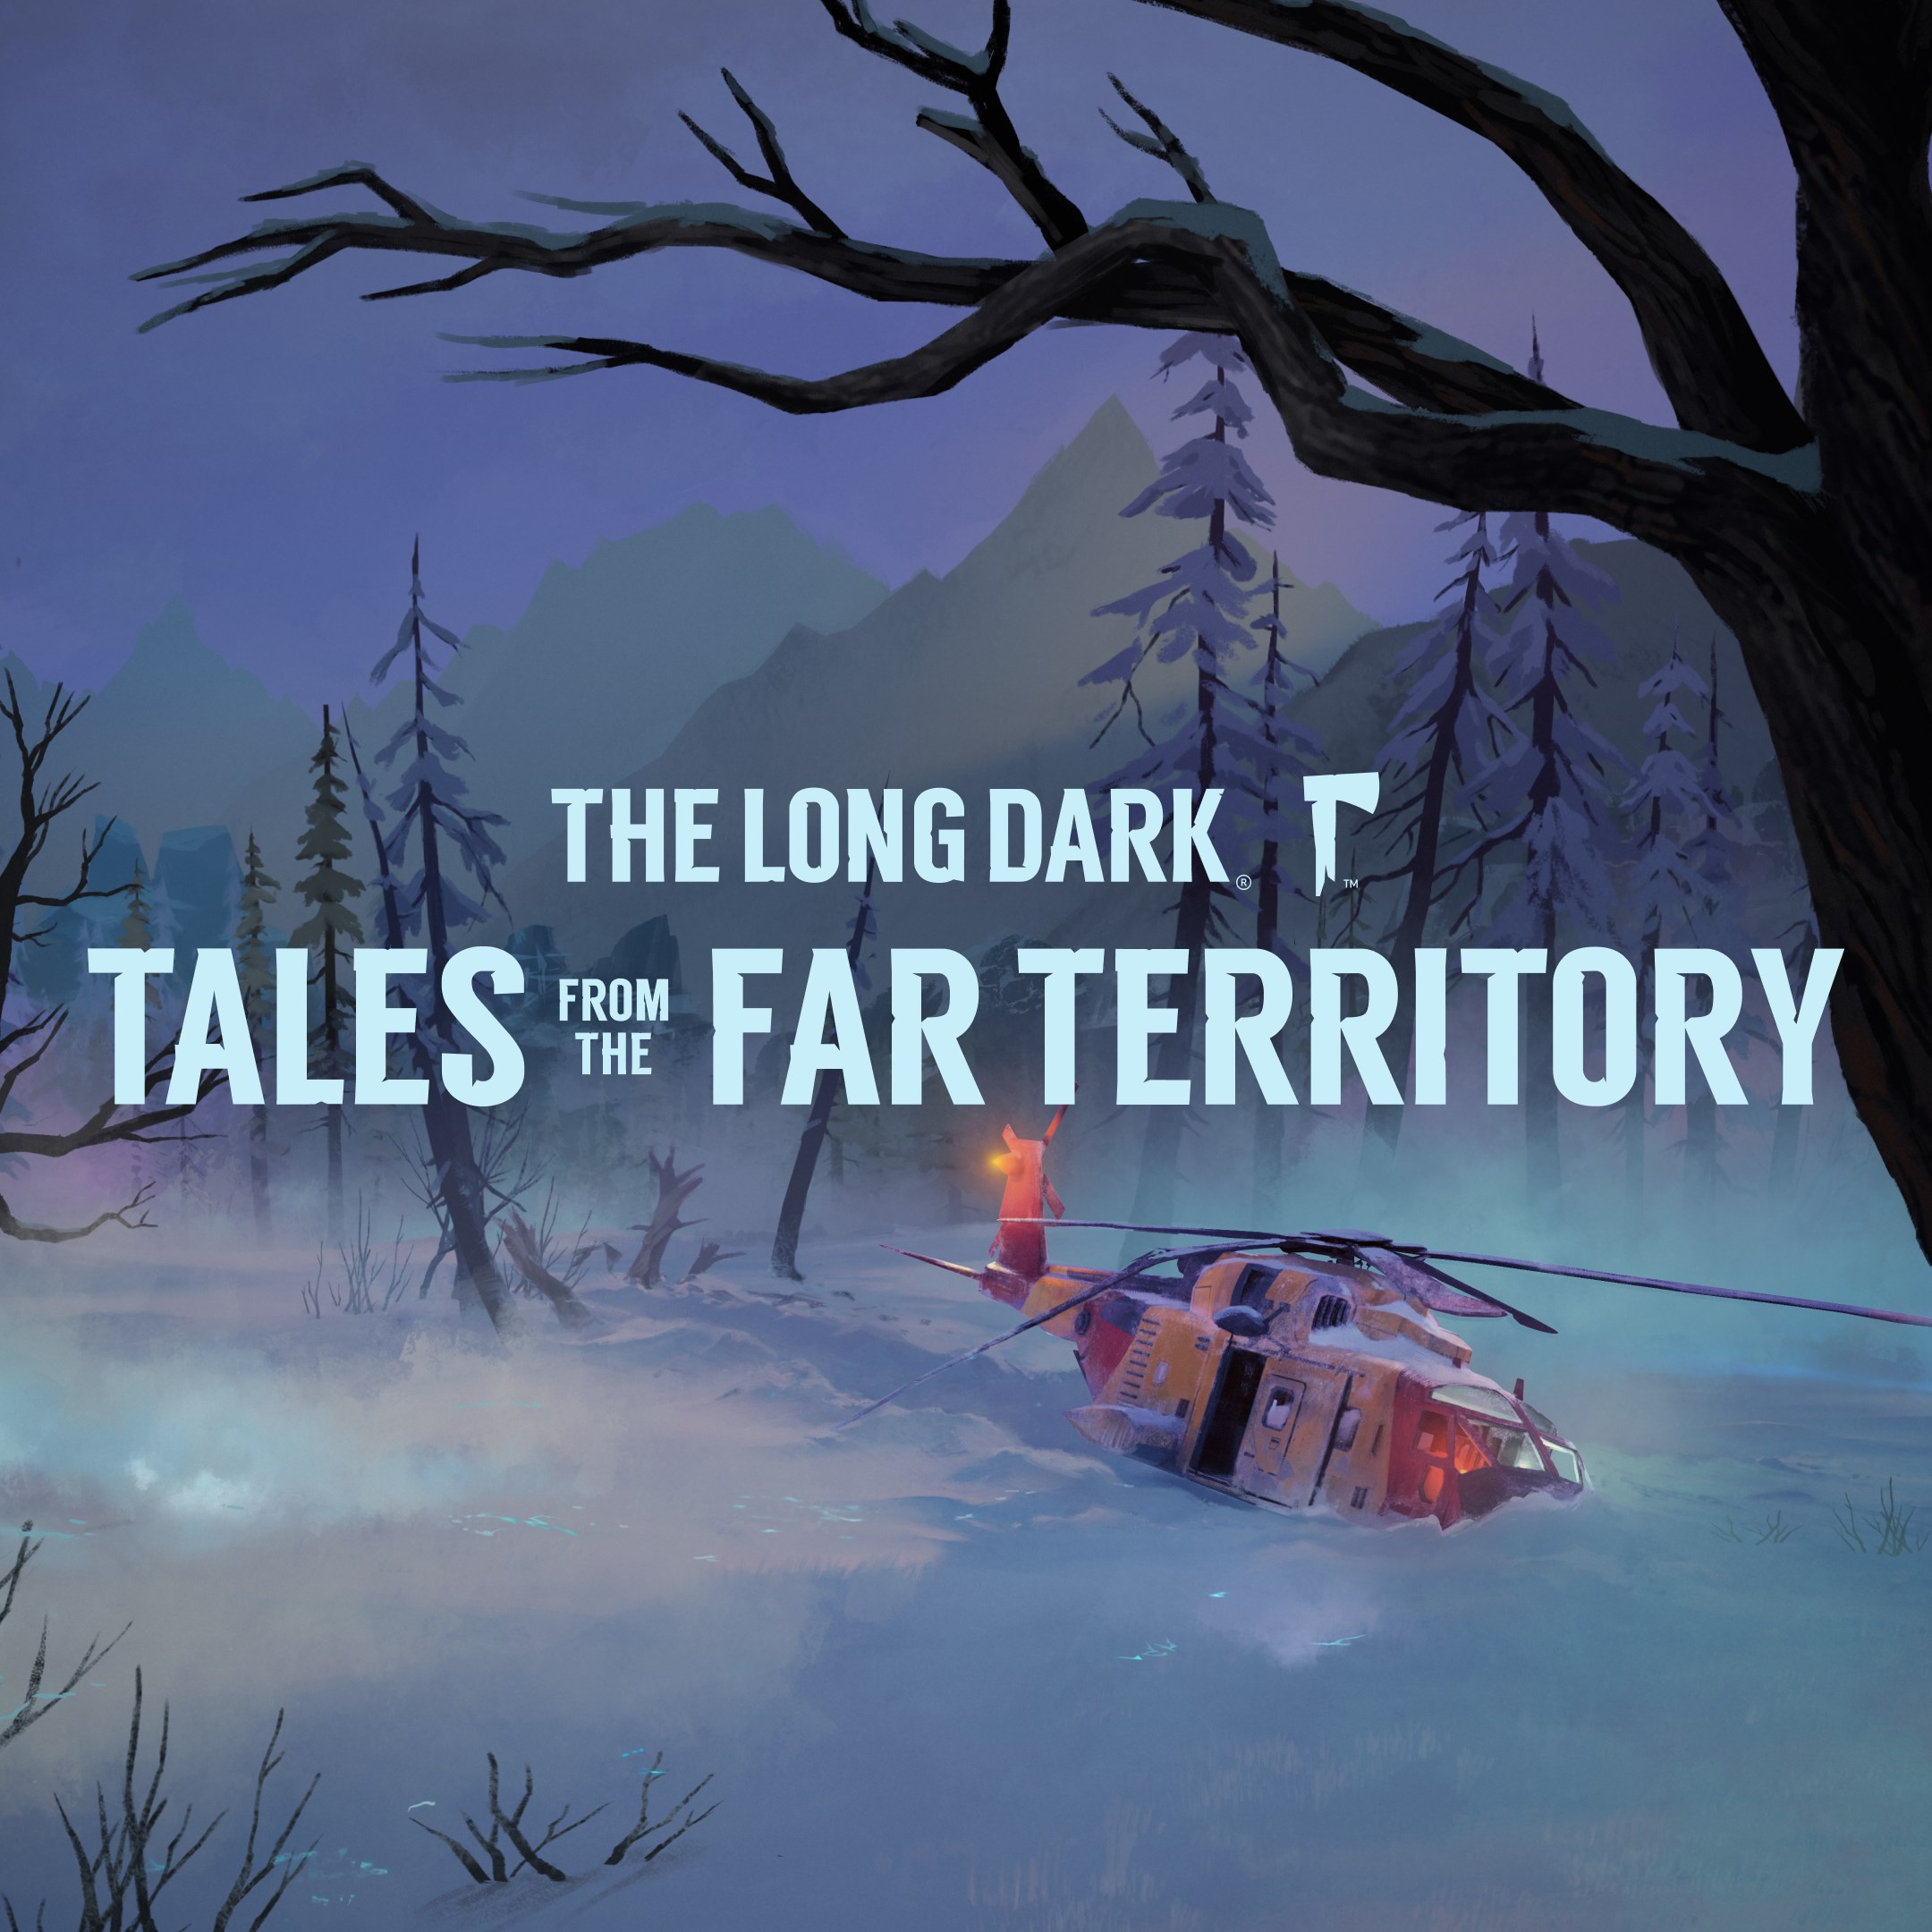 The long Dark Tales from the far Territory карта. Tales from the far territory